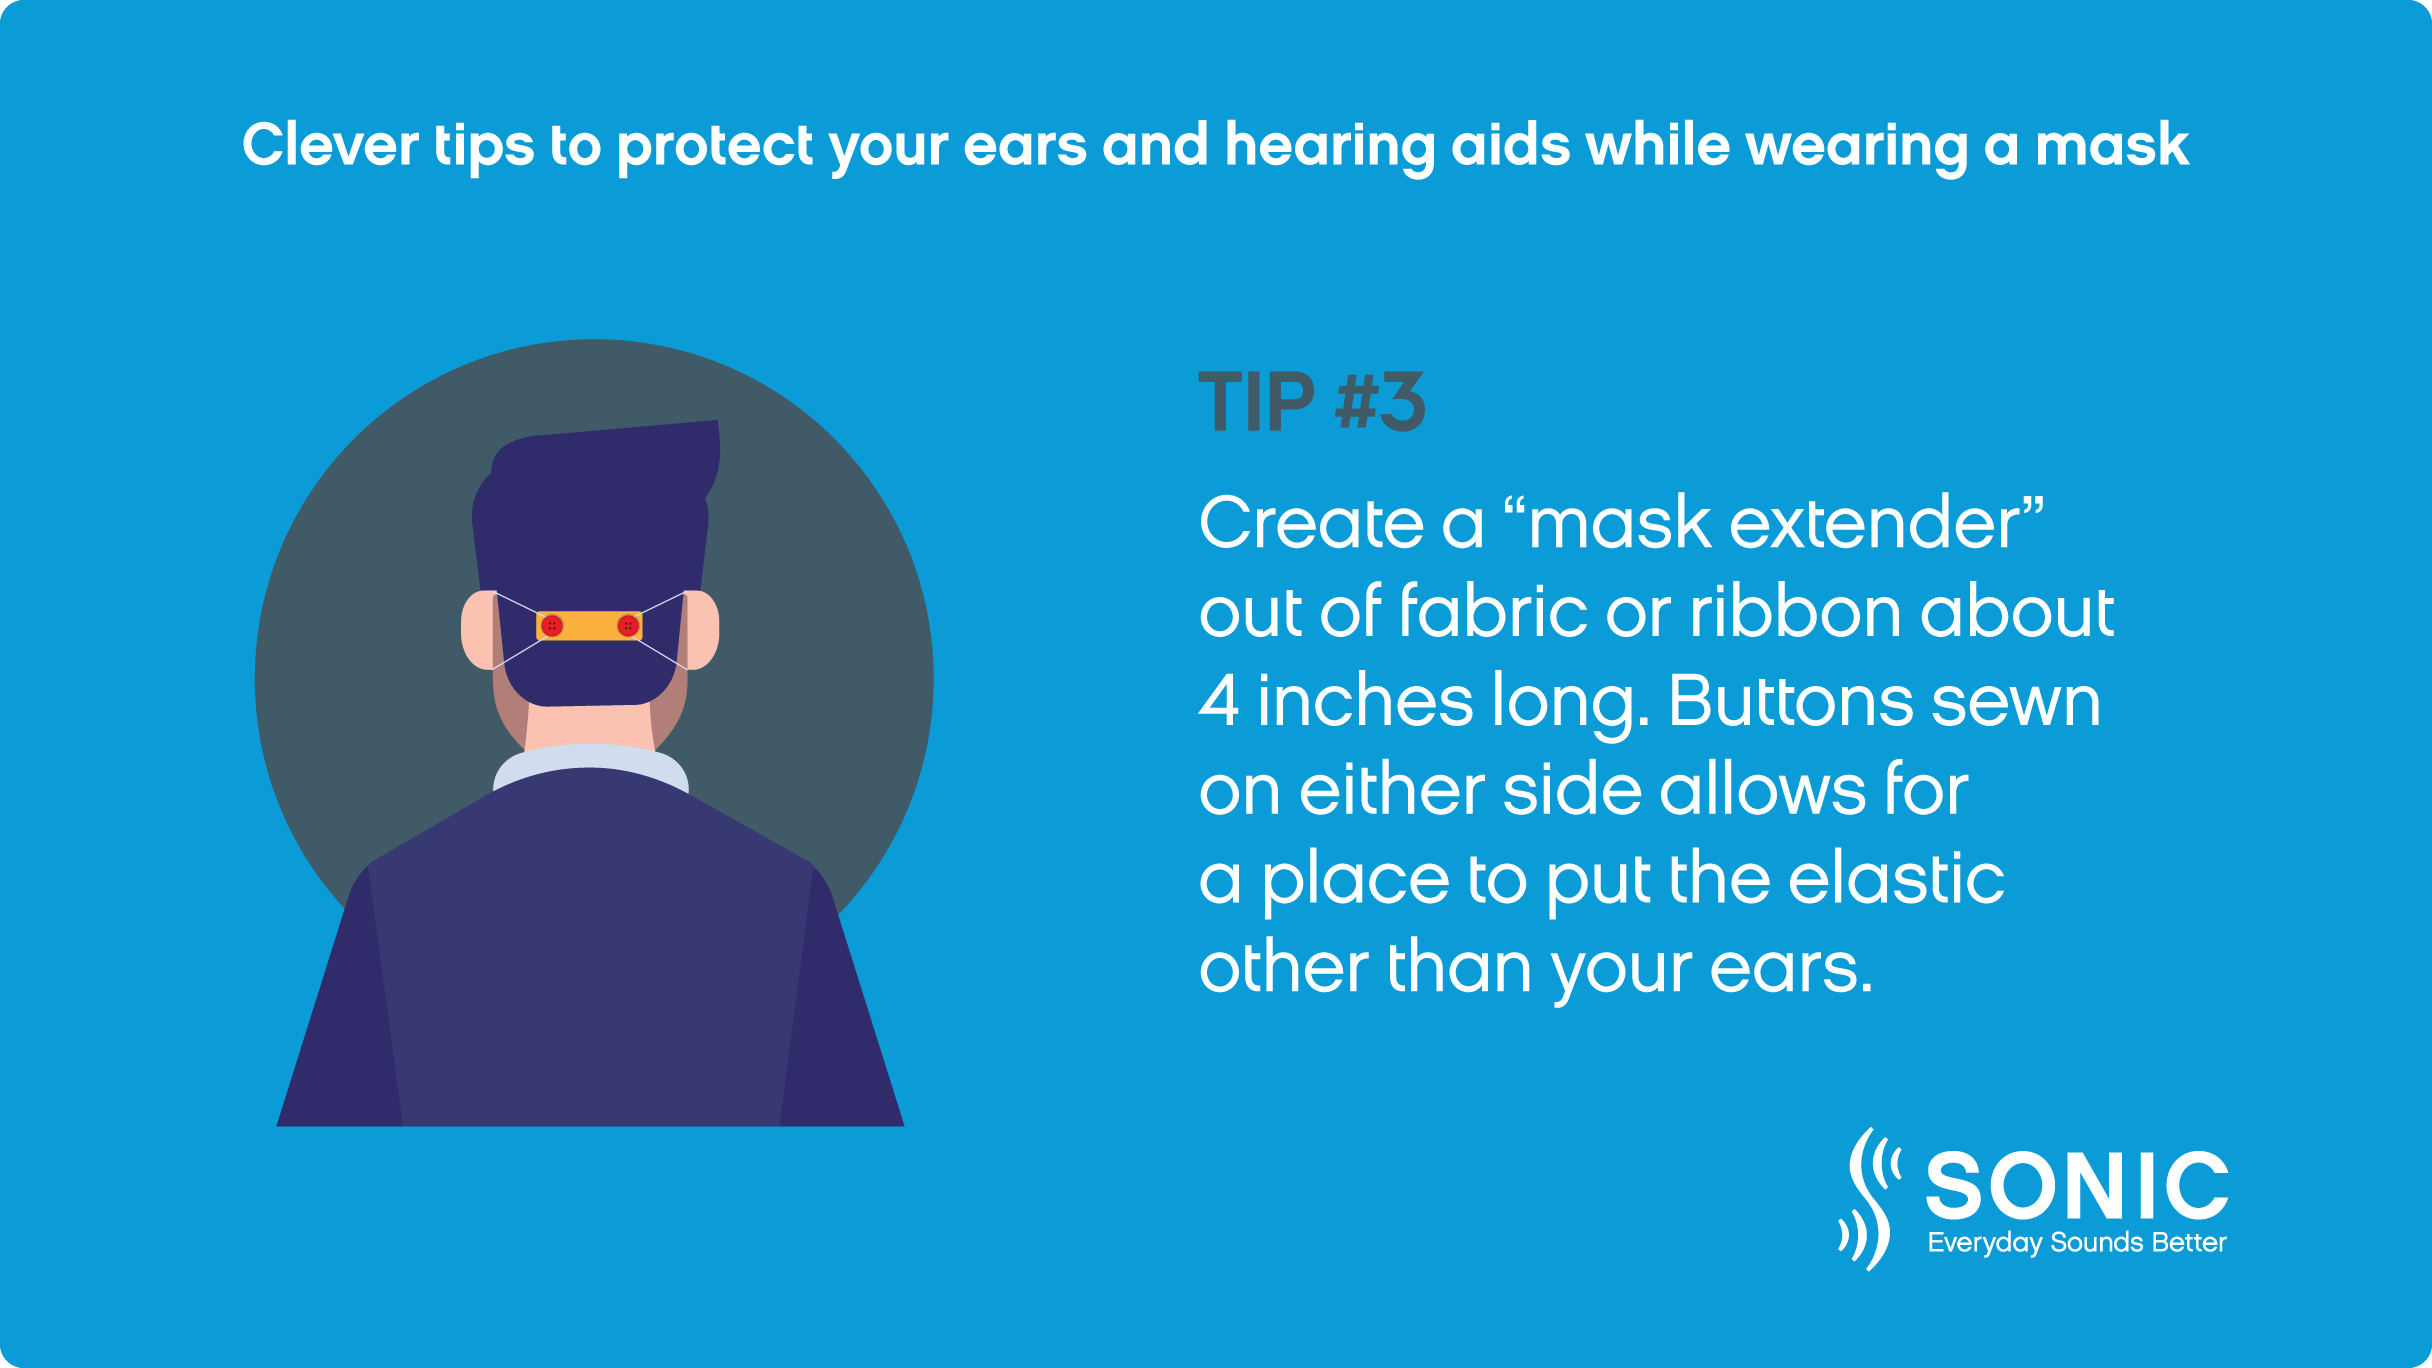 face-mask-and-hearing-aids-sonic-tip-3